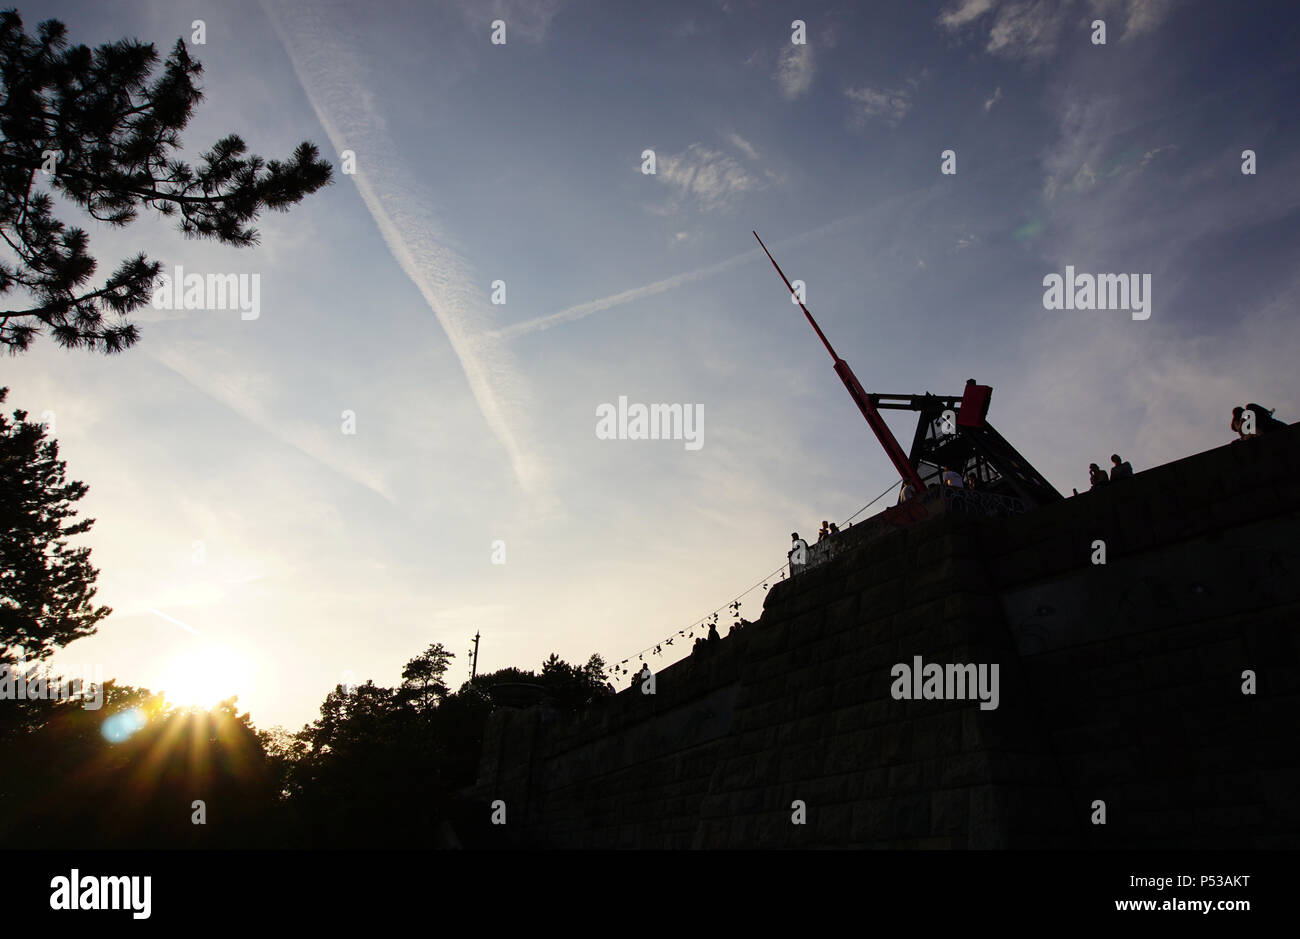 A silhouette of the iconic metronome in Letna Park, Prague (Czech Republic) taken towards the end of the day. Stock Photo